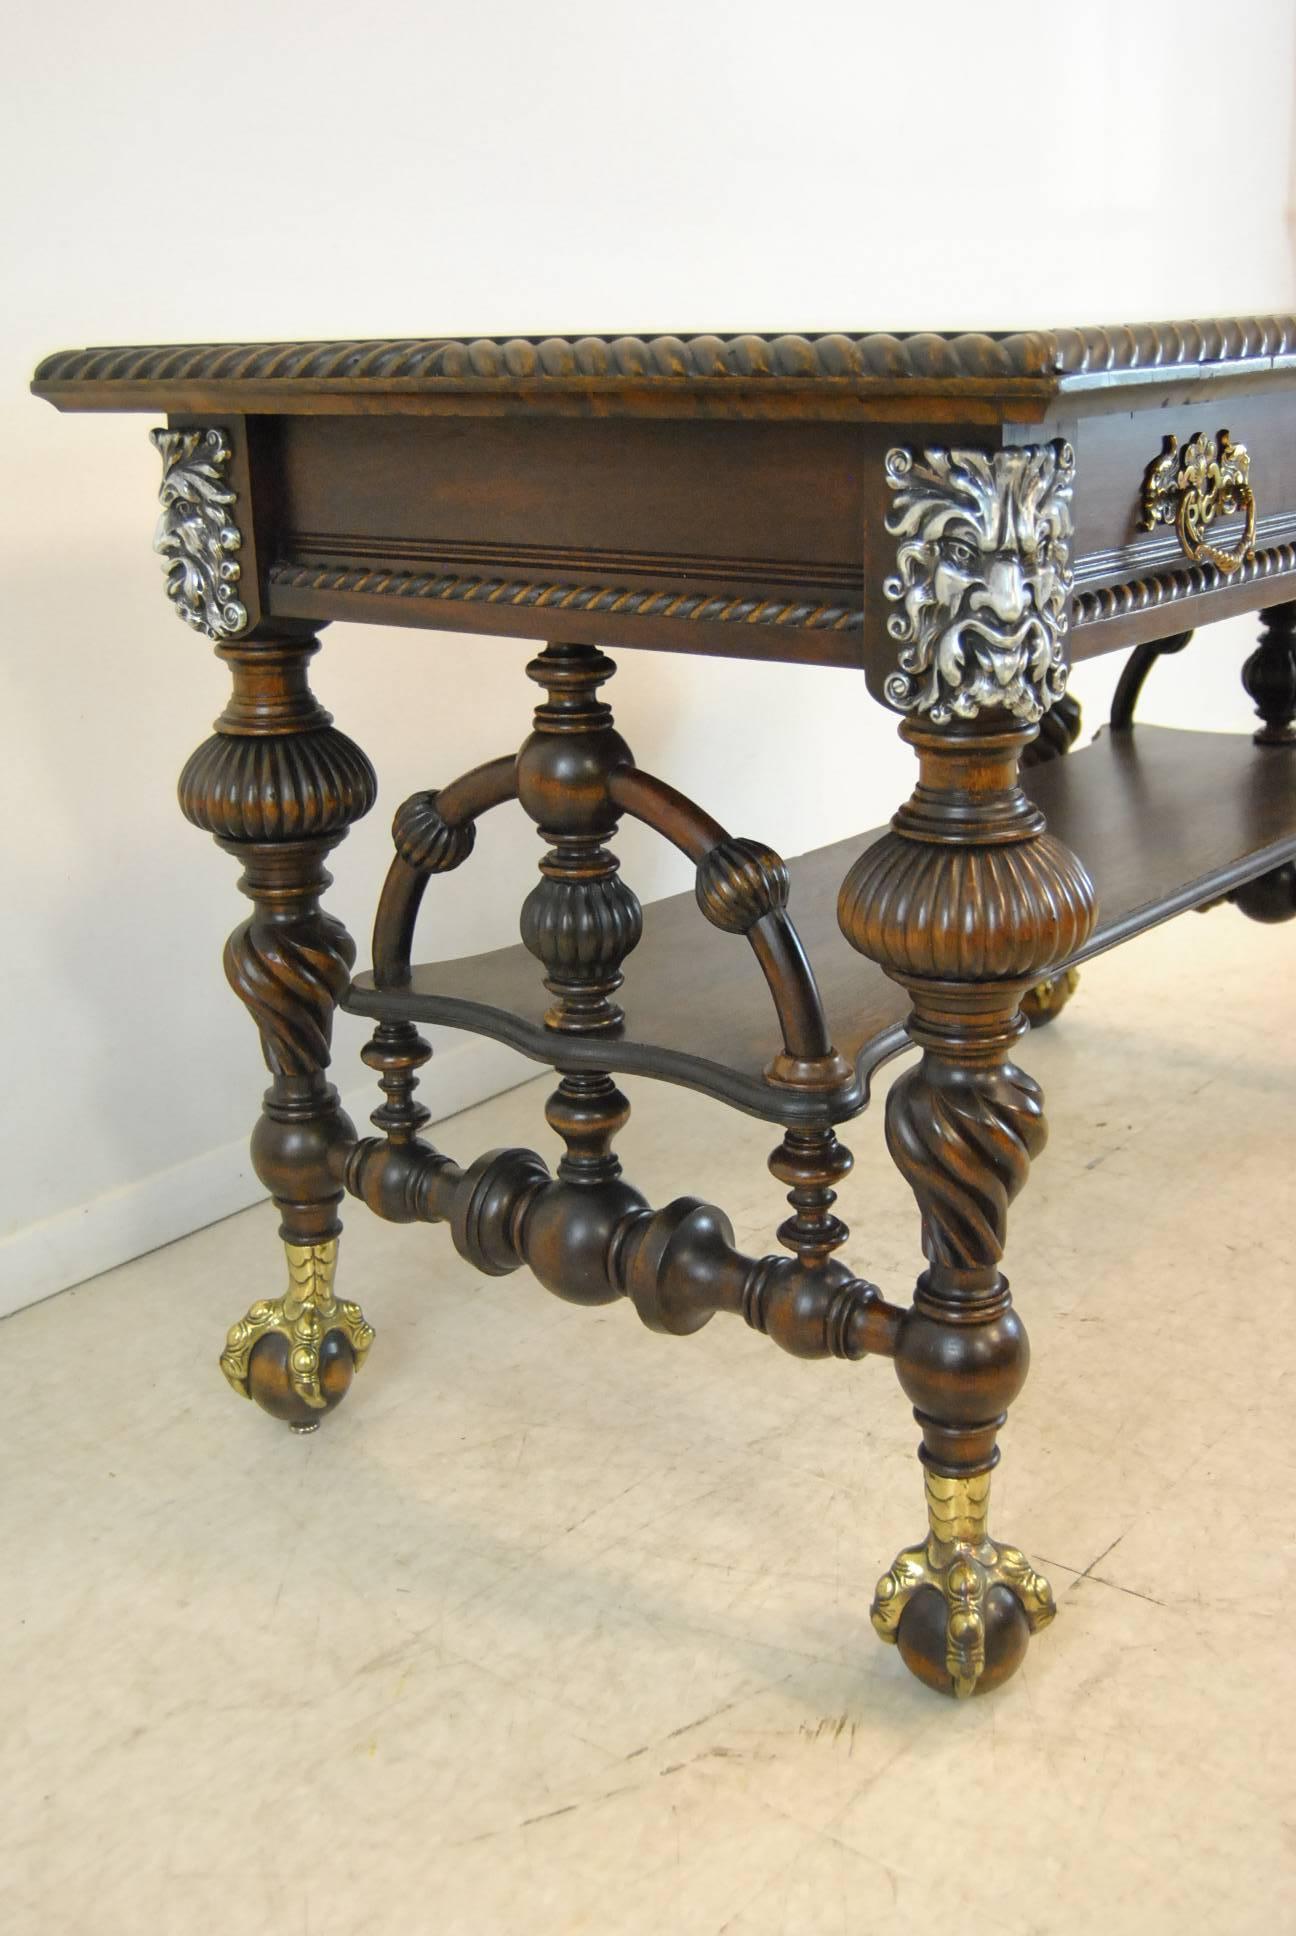 A stunning mahogany library table, circa 1890. This gorgeous table features a rope twist top border, nickel-plated cast heads of a mythical male figure and brass claw feet. The dimensions are 50